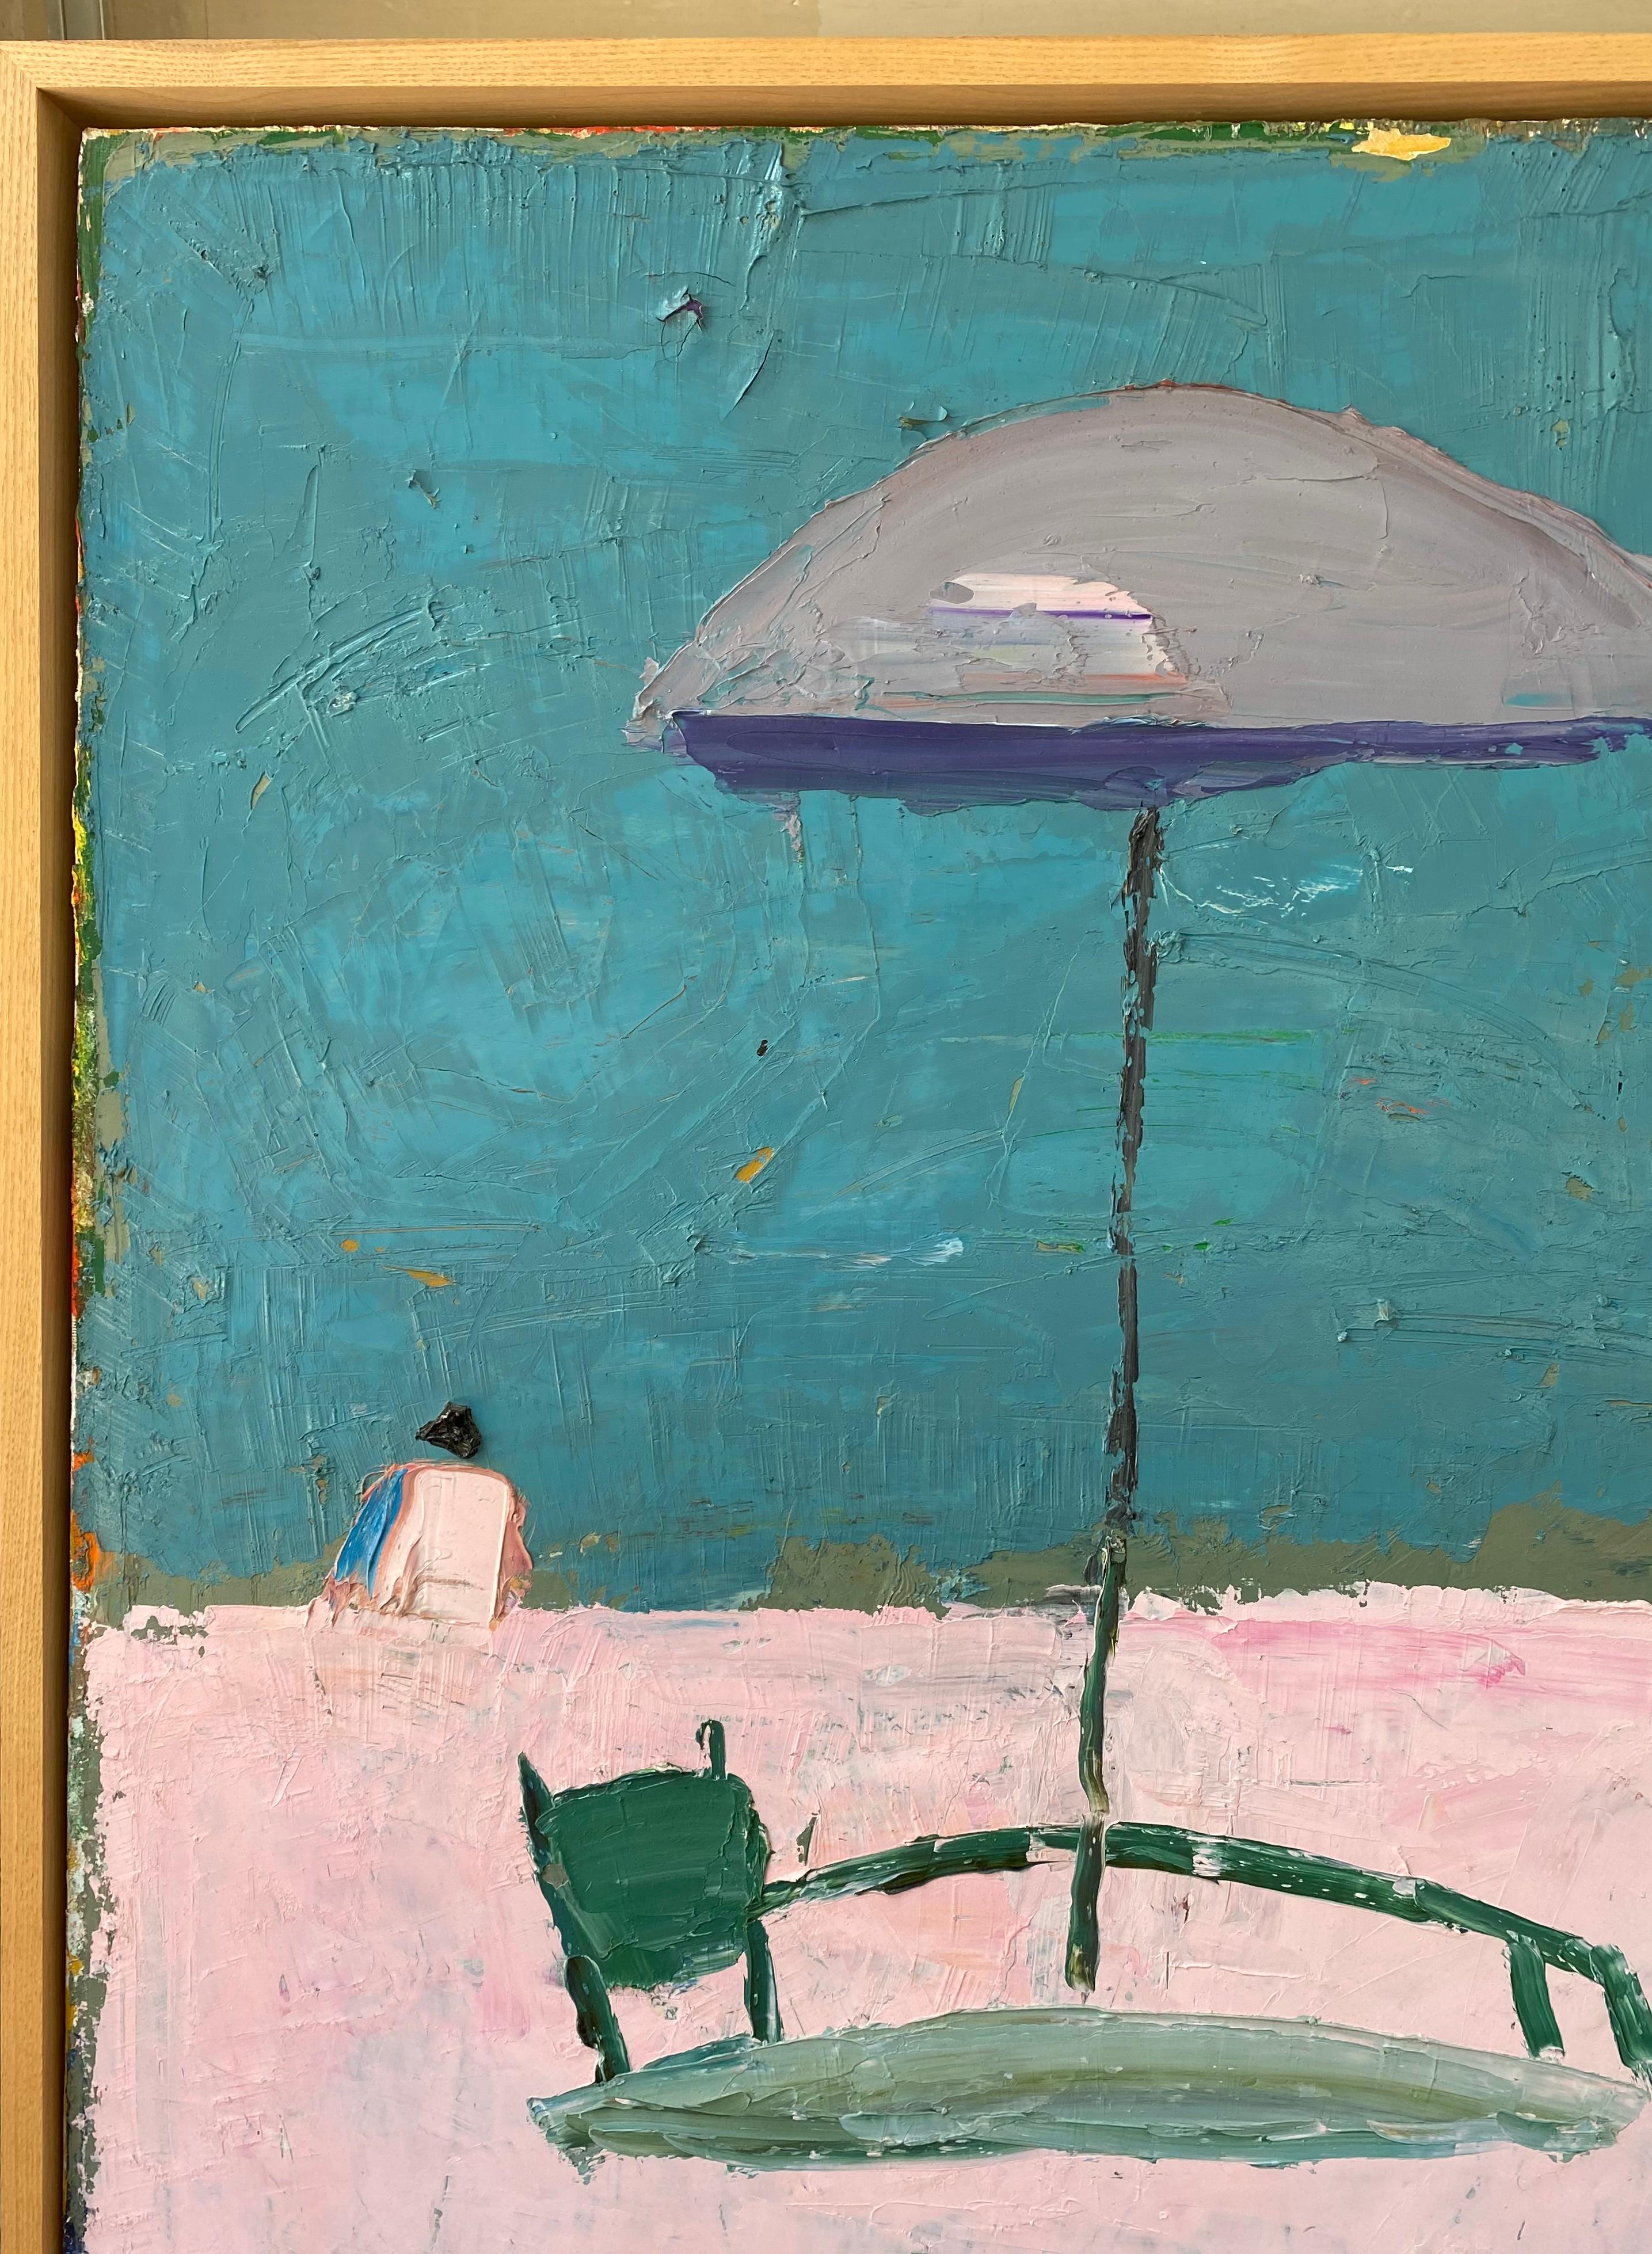 A very charming beach scene featuring umbrellas, beach chairs, and a lone figure painted by late Virginia based artist Theodore Turner. Ted was perhaps best known for his landscapes, some featuring rolling Virginia hills, or scenes from Virginia